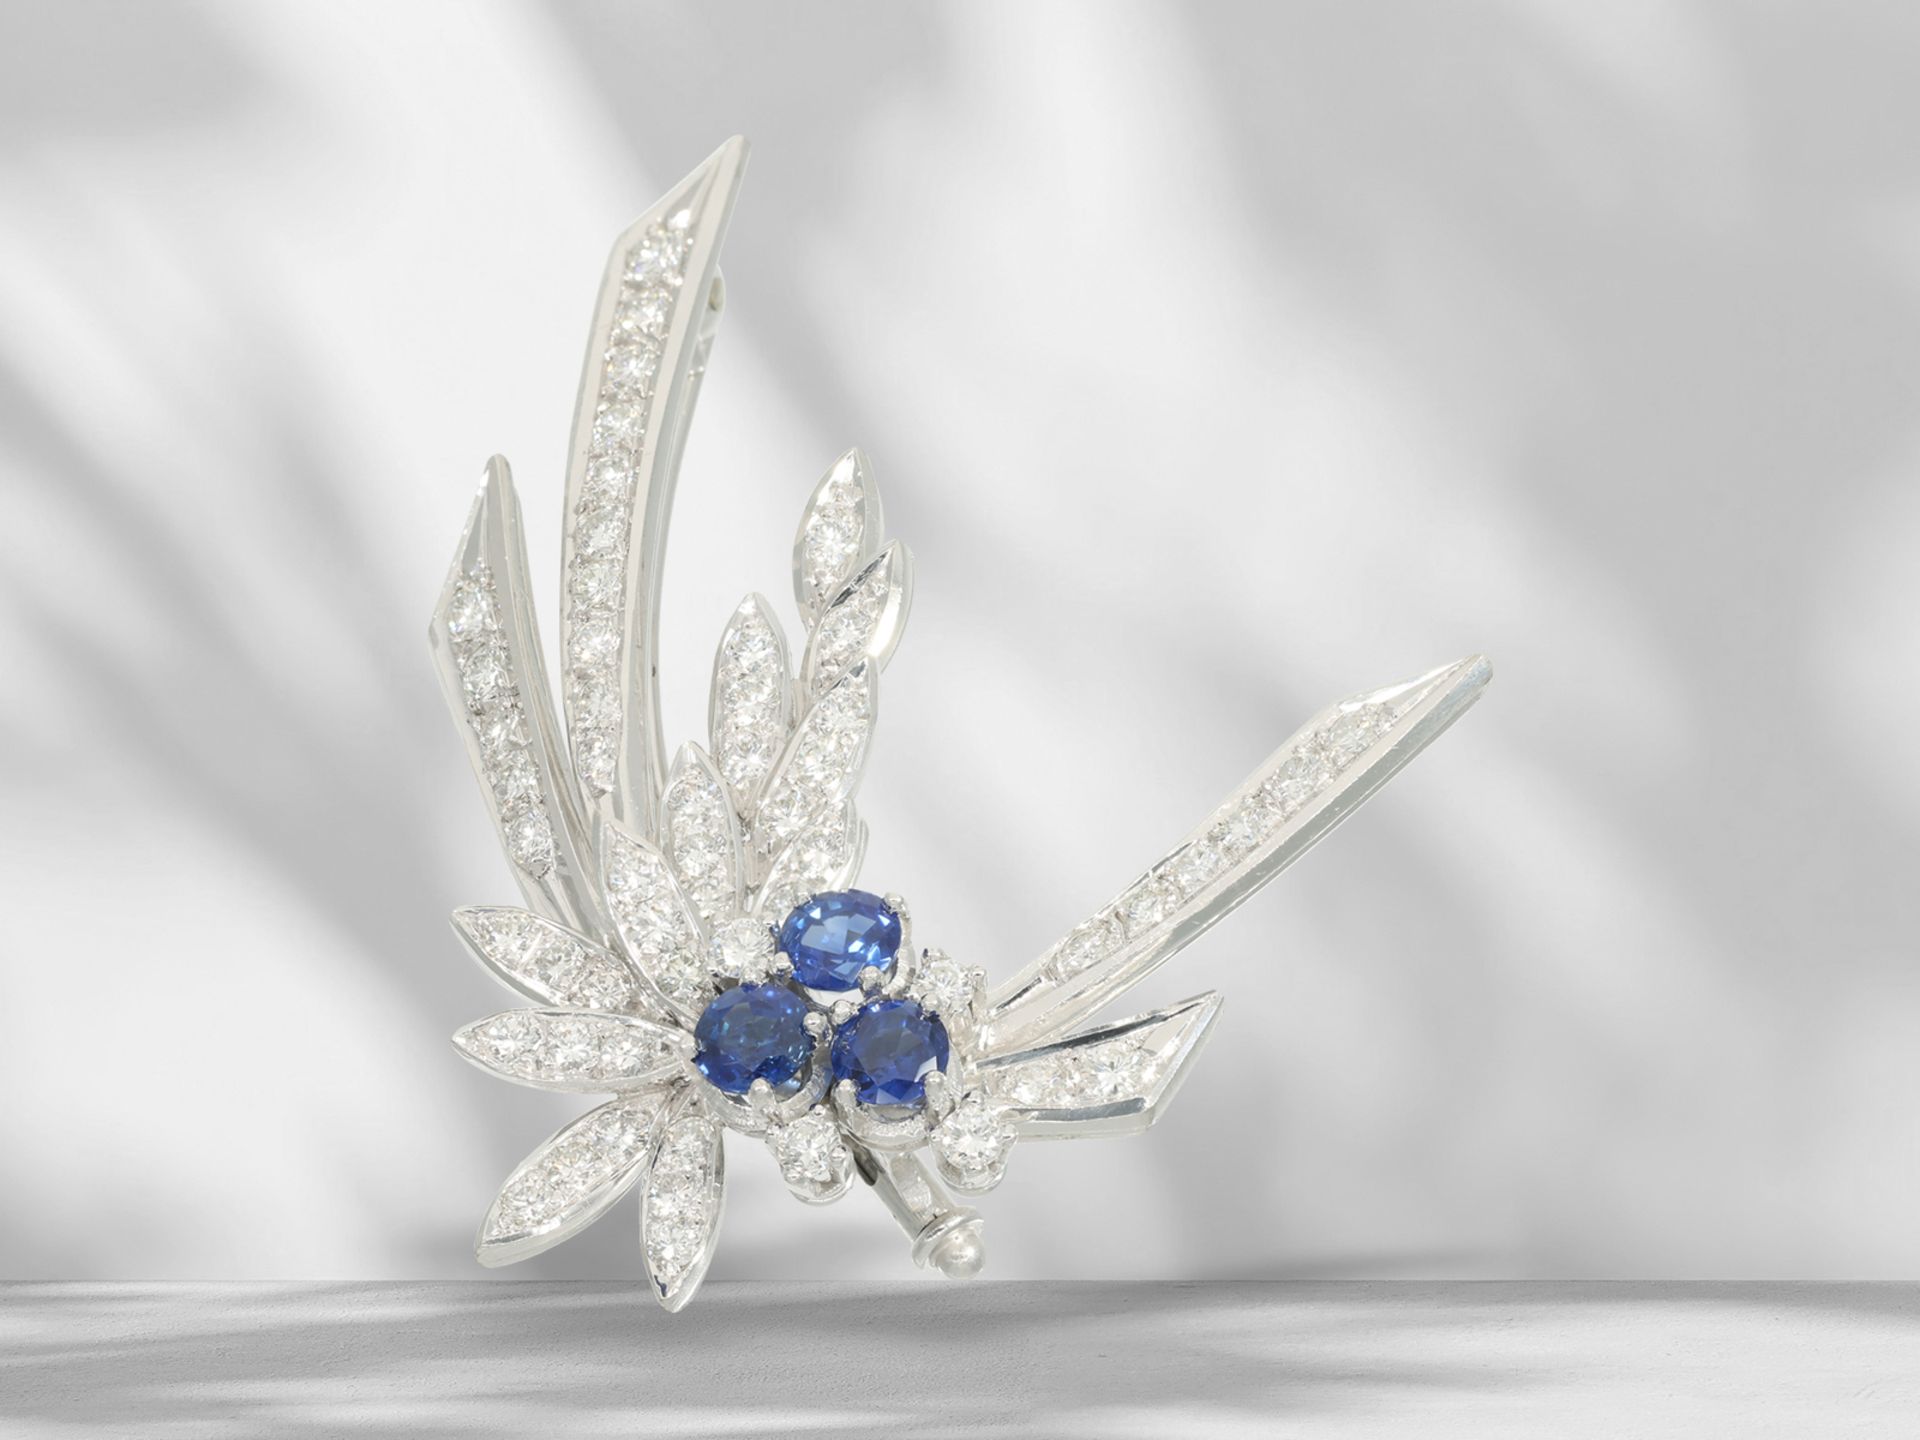 Brooch/pin: decorative vintage flower brooch in 18K white gold with sapphire and brilliant-cut diamo - Image 4 of 4